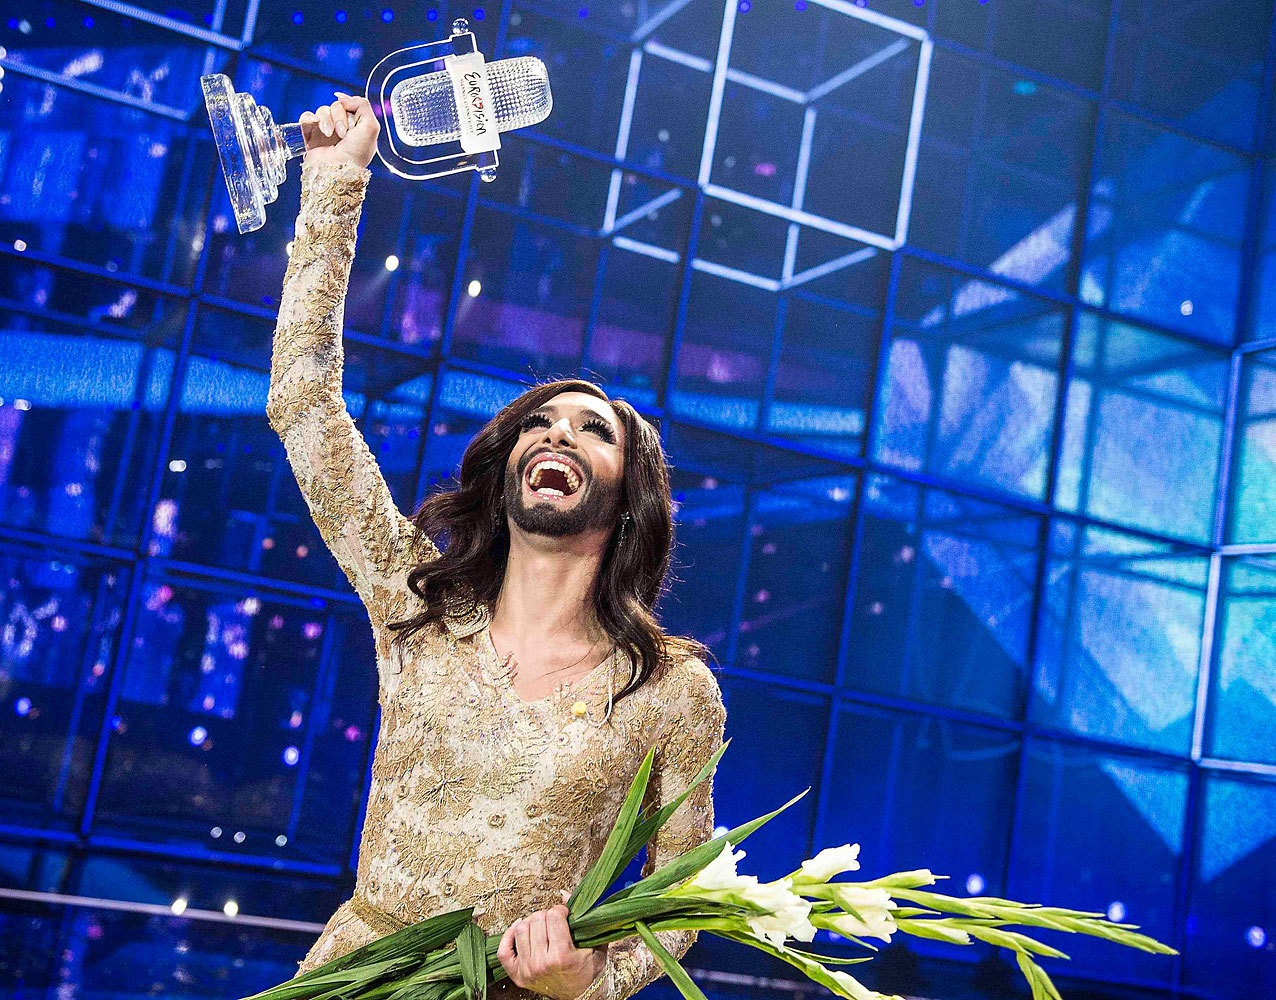 Conchita Wurst representing Austria celebrates with the trophy after winning the 59th annual Eurovision Song Contest in Copenhagen